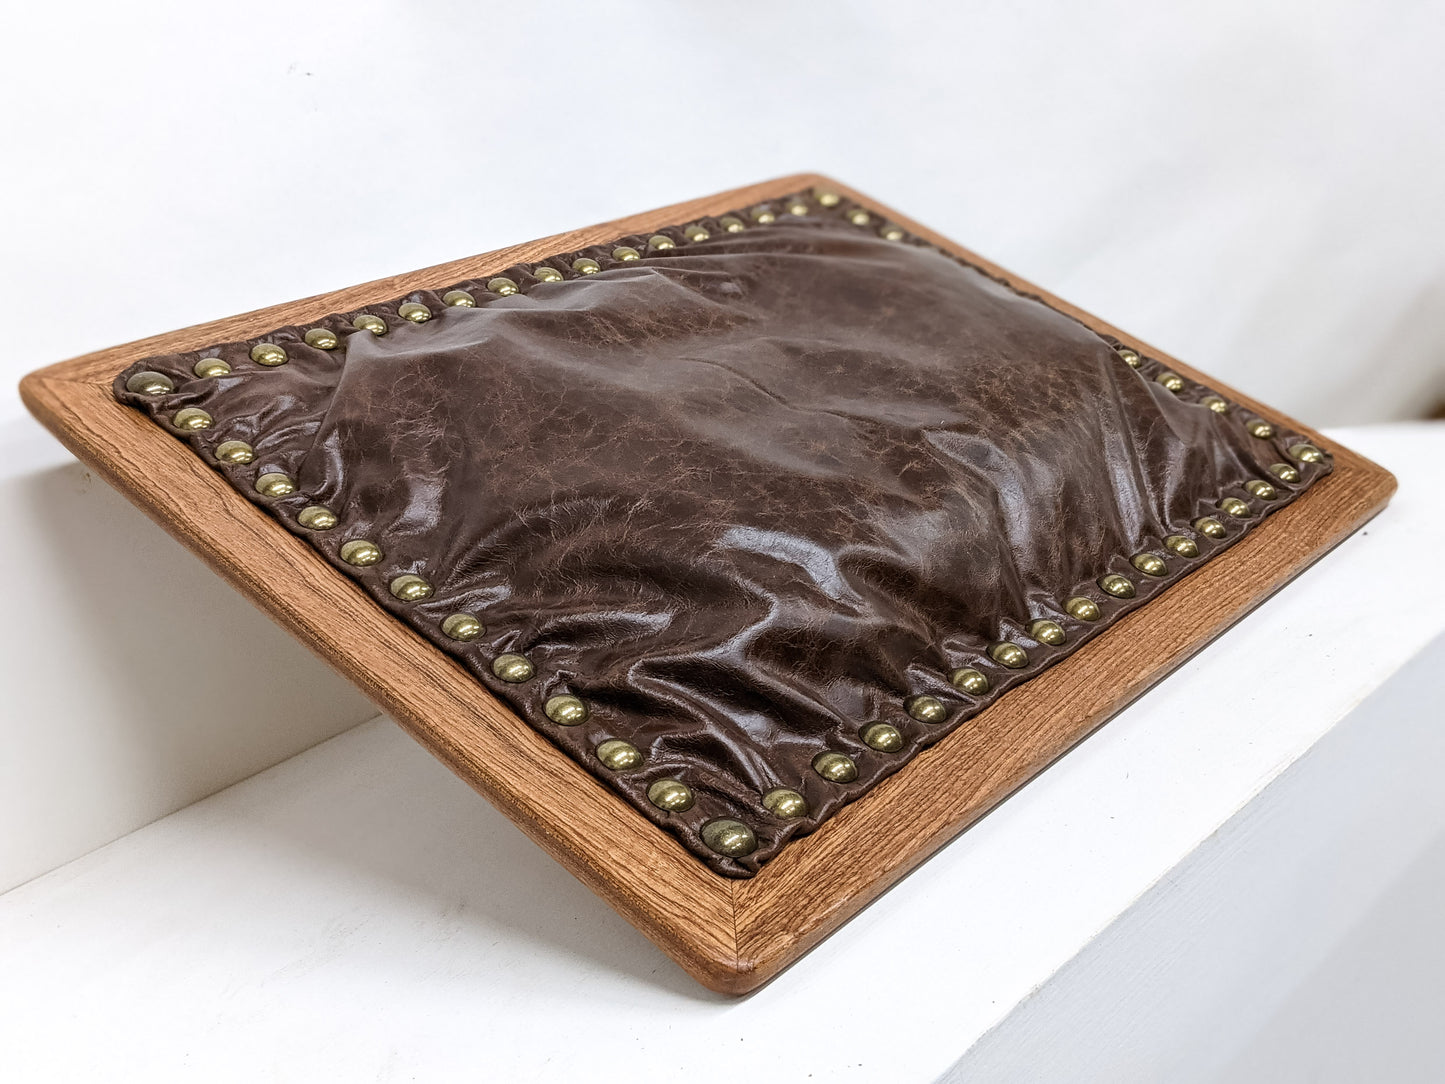 The bottom of our Leather Cushion Writing Lap Desk is shown. The mahogany wood frames a bulging bean filled, dark brown, leather cushion that is securely attached by 56 shining brass pins.